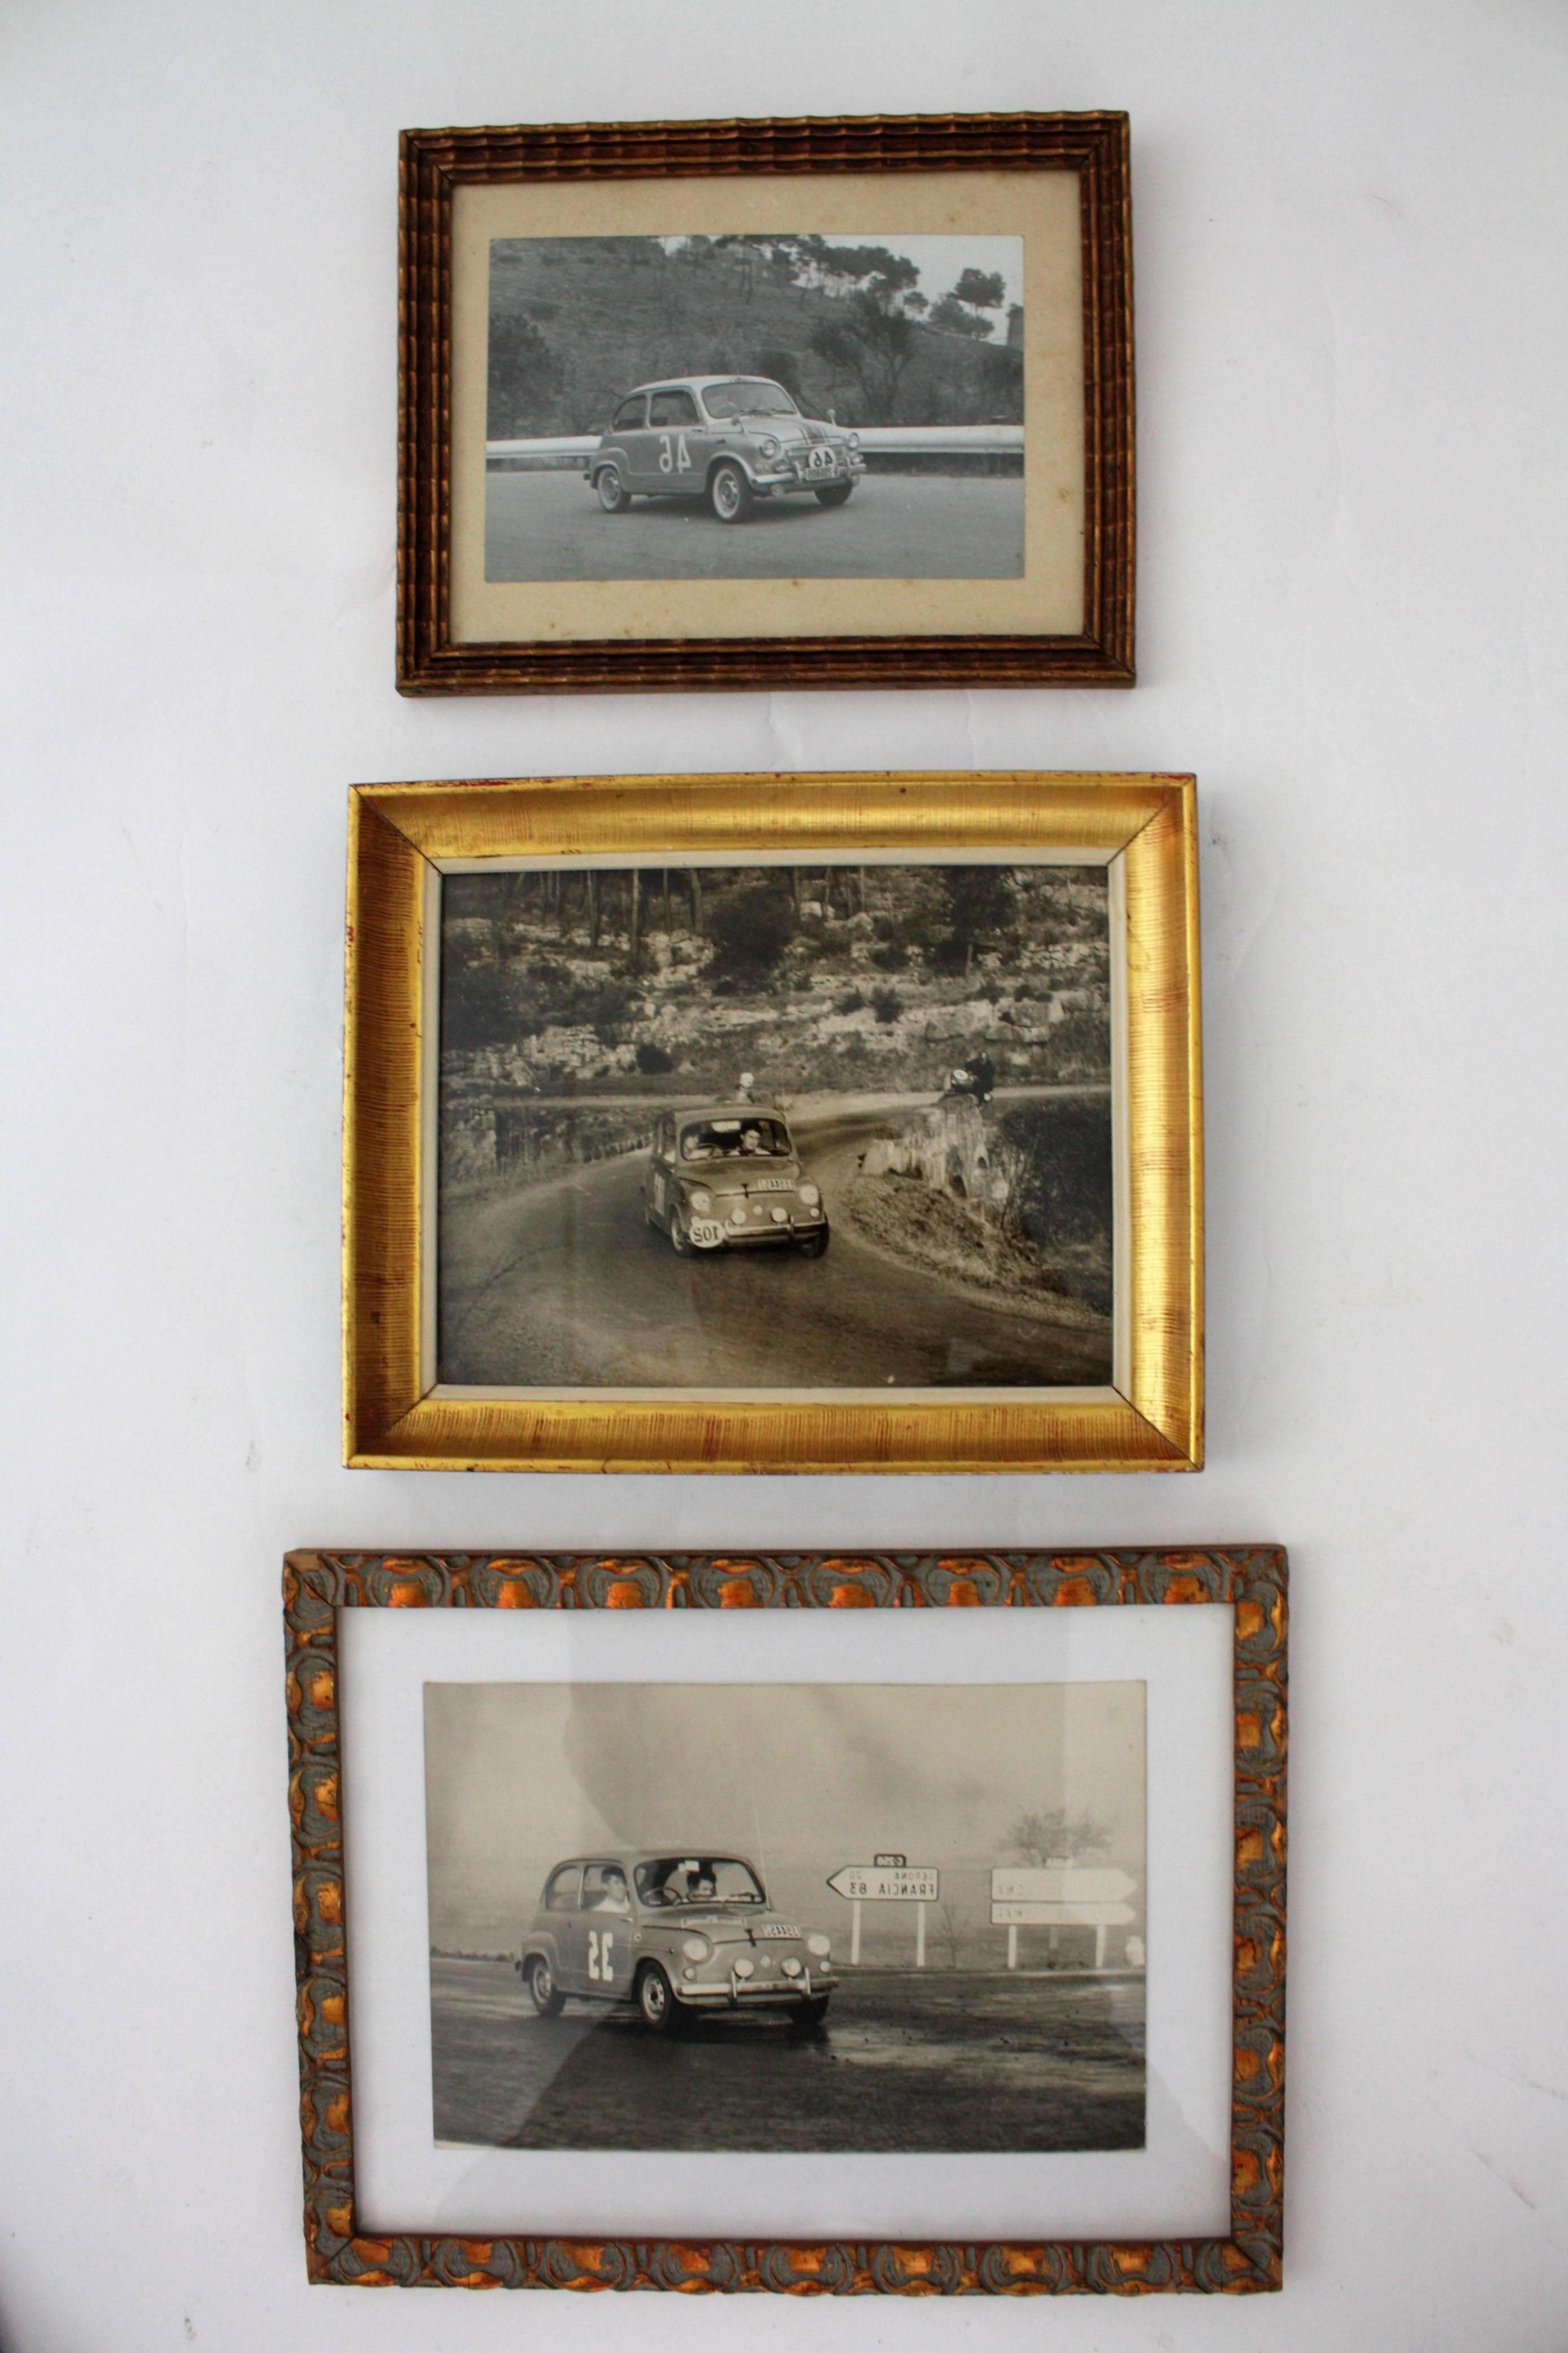 Set of three black and white photographs with their original frames with 600 Fiat seat cars. Spain, 1960s
Dimensions of the photos framed: 25cm W x 19.5cm H; 27.5cm W X 22.5cm H; 33 cm W x 25. cm H
Dimensions of the photos: 18 x 12 cm ; 22 x 17cm